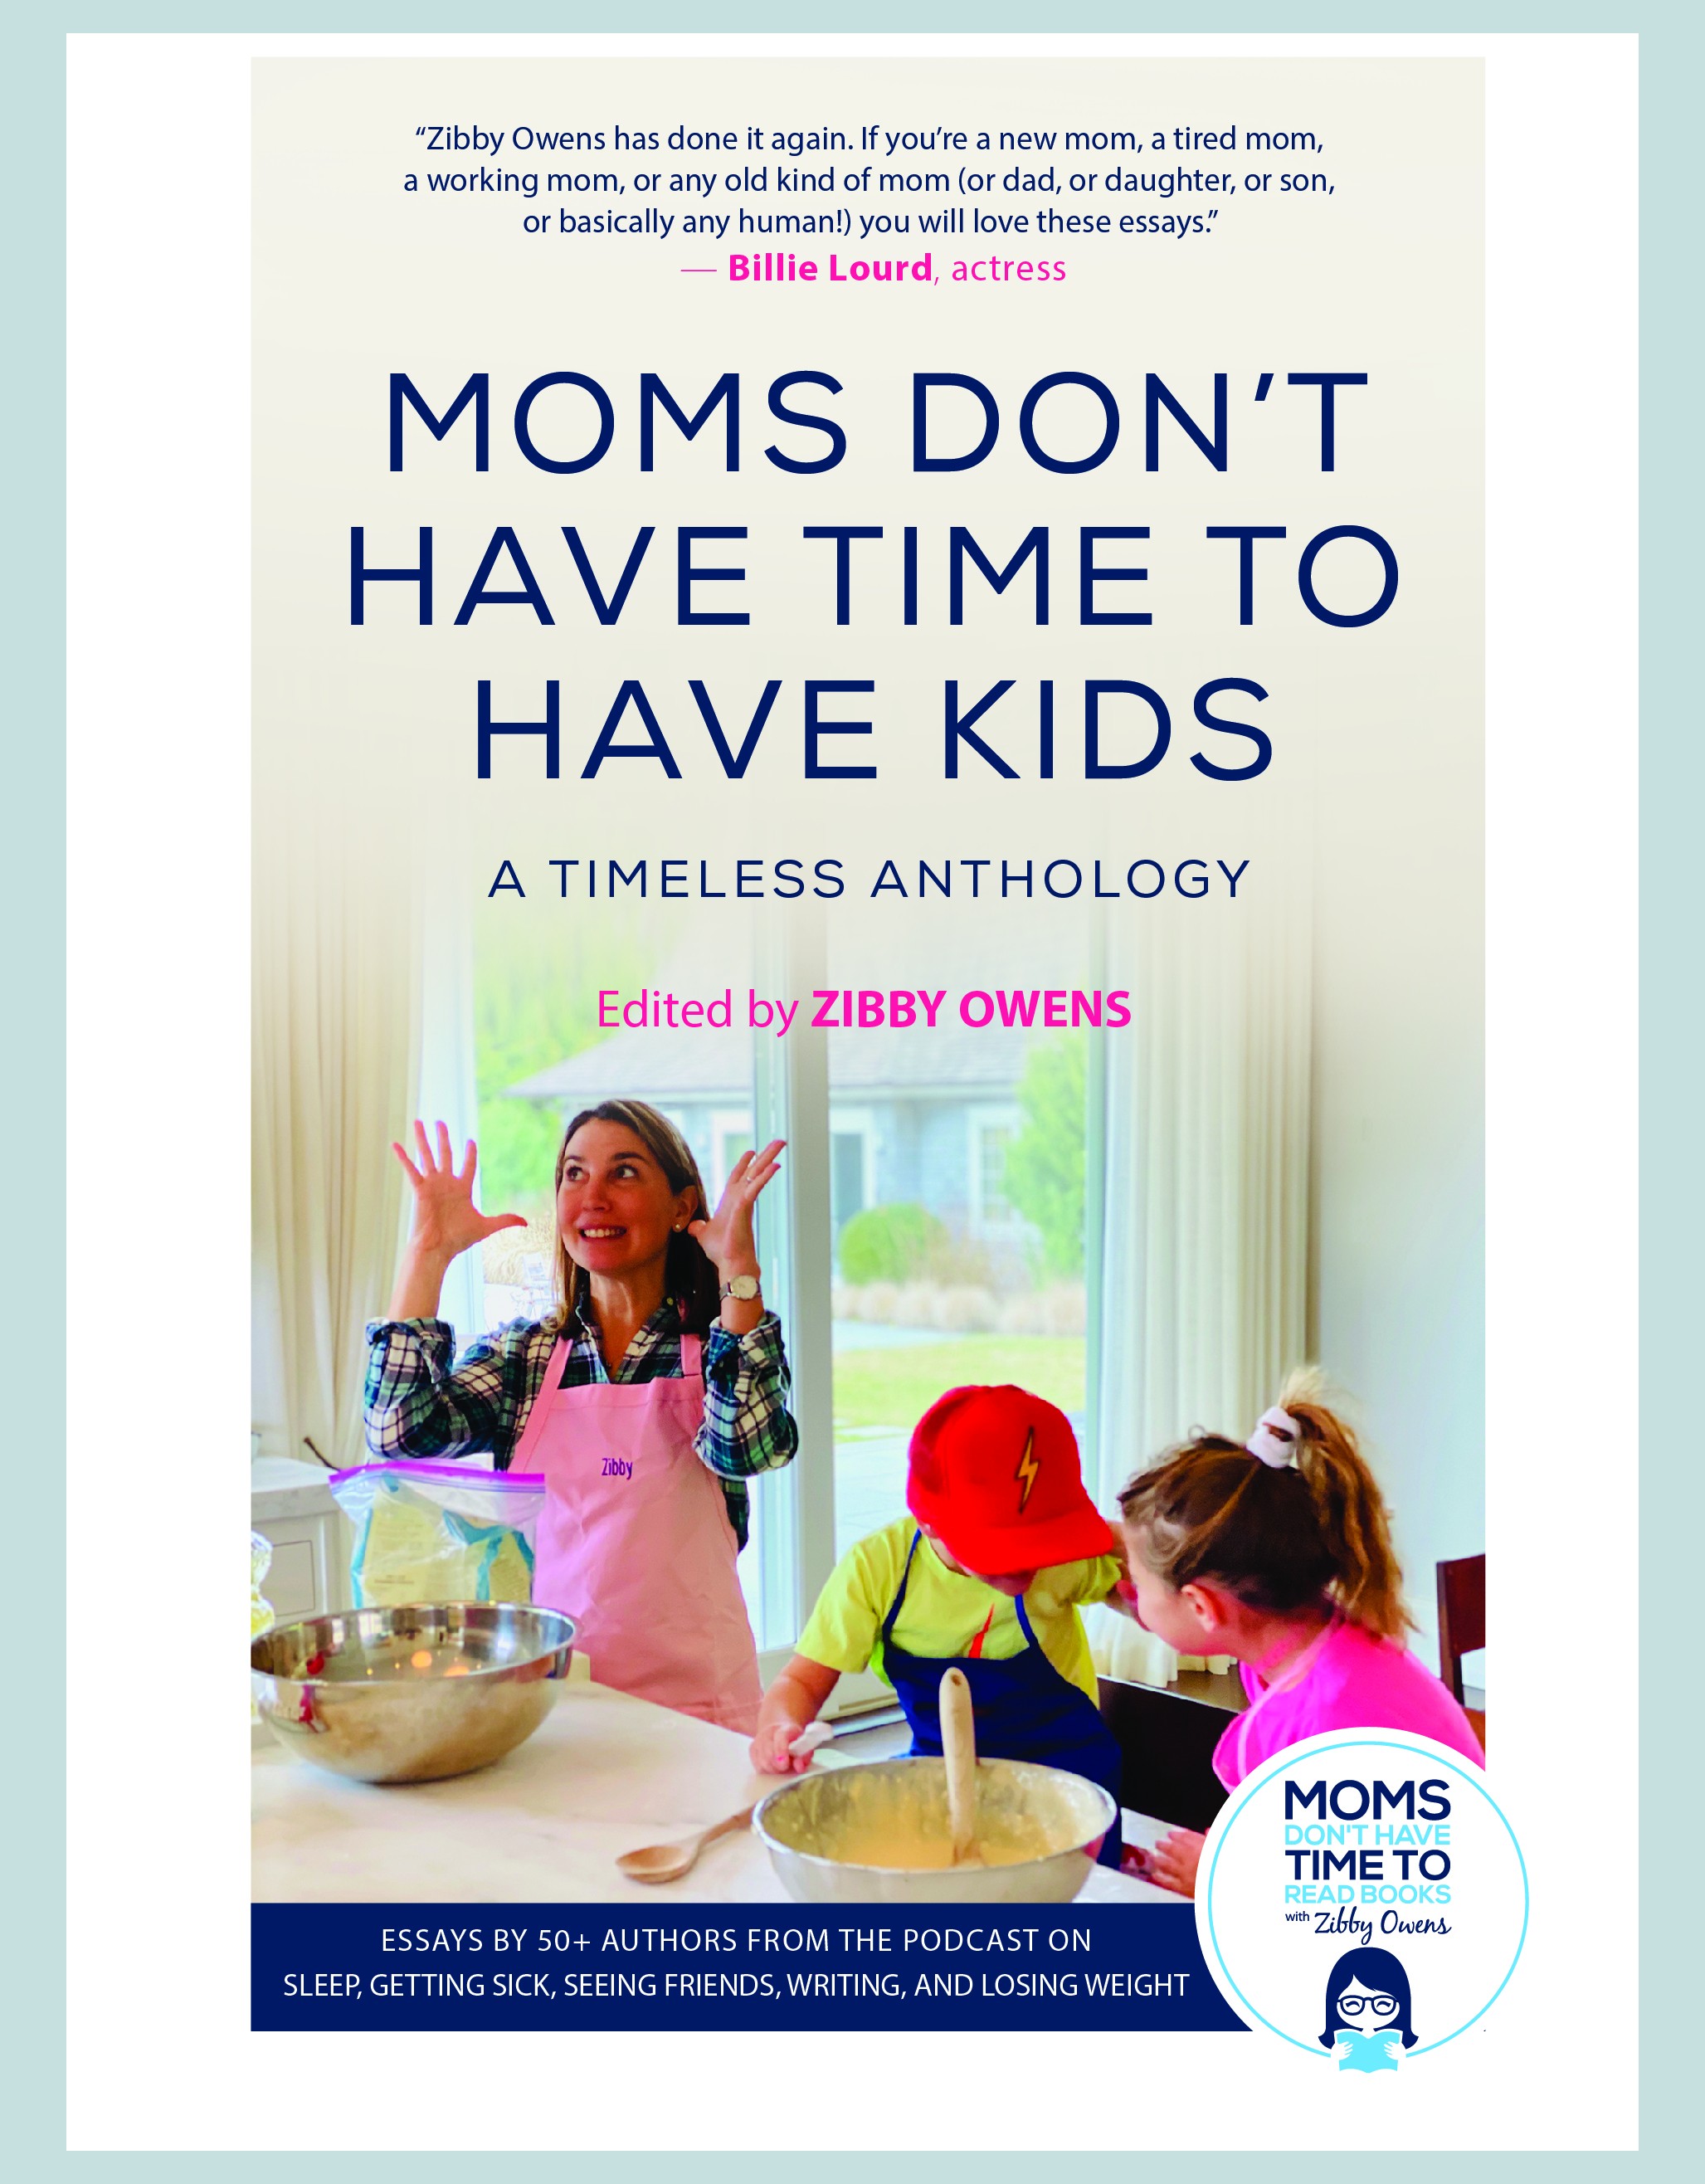 https://www.jewishbookcouncil.org/sites/default/files/styles/book_cover_teal/public/images/Moms%20Don%27t%20Have%20Time%20to%20Have%20Kids.JPG